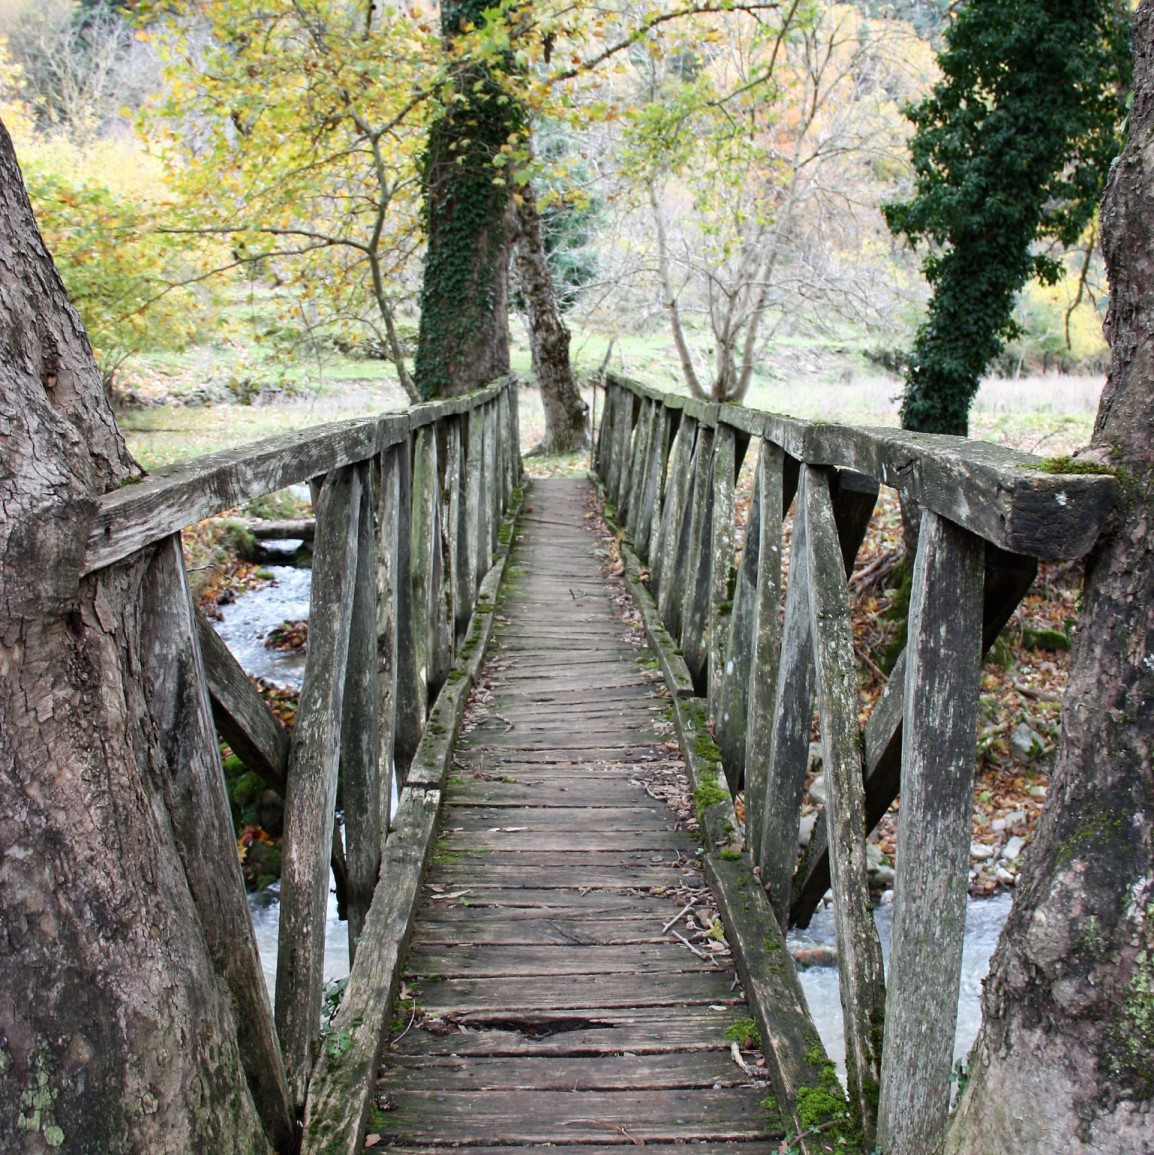 an old wooden bridge, which joins the two banks of a river in the forest